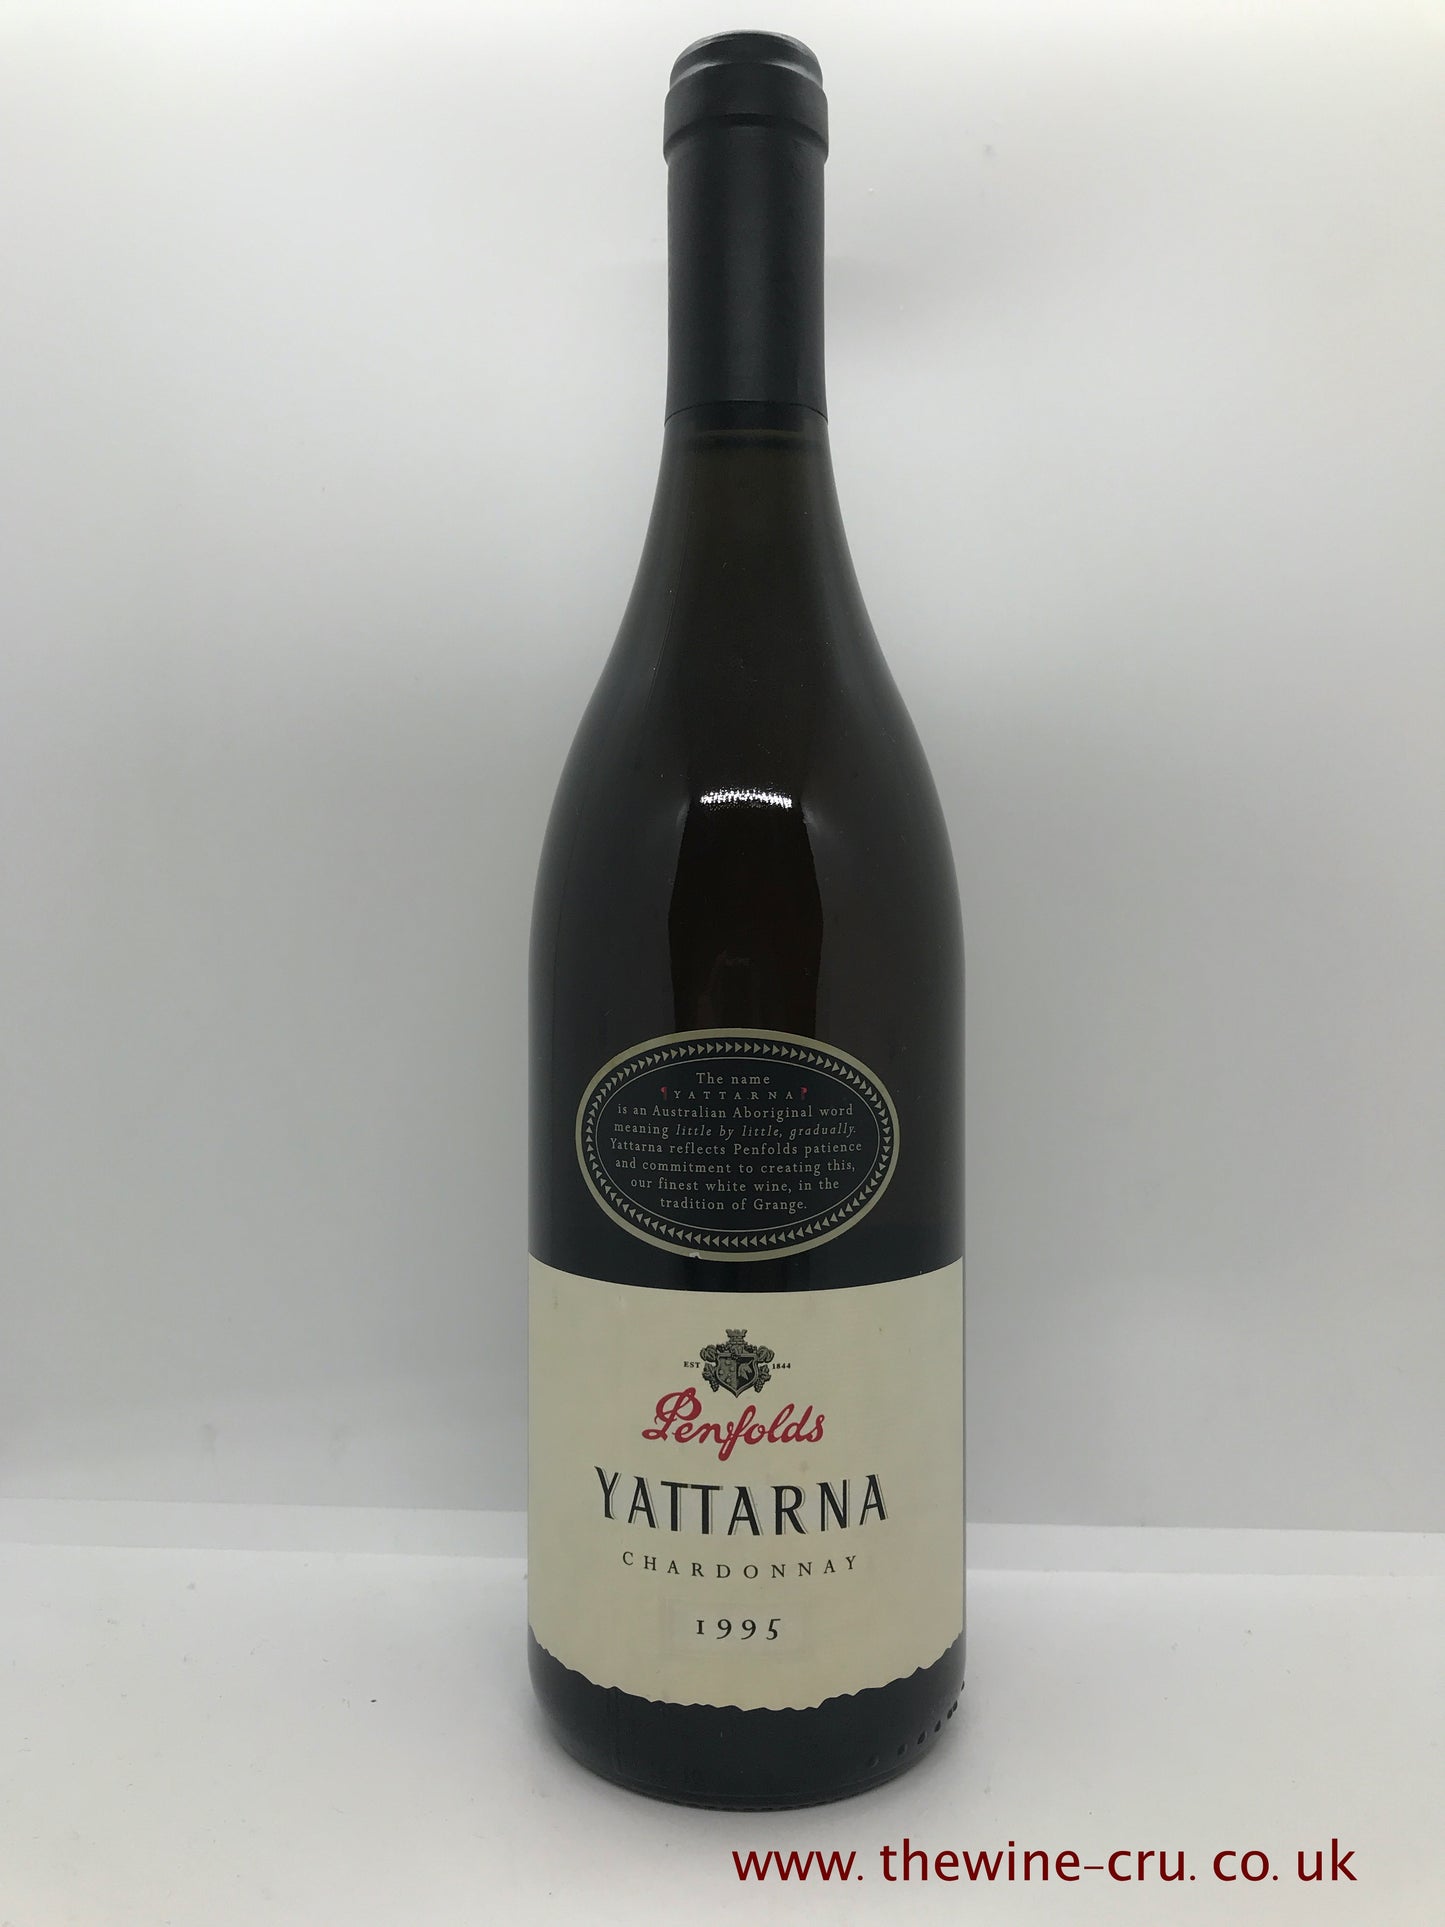 A bottle of the first ever vintage of Penfolds premium white wine. Yattarna 1995 from South Australia. Bottle is in good condition. Immediate delivery. free local delivery. Gift wrapping available.